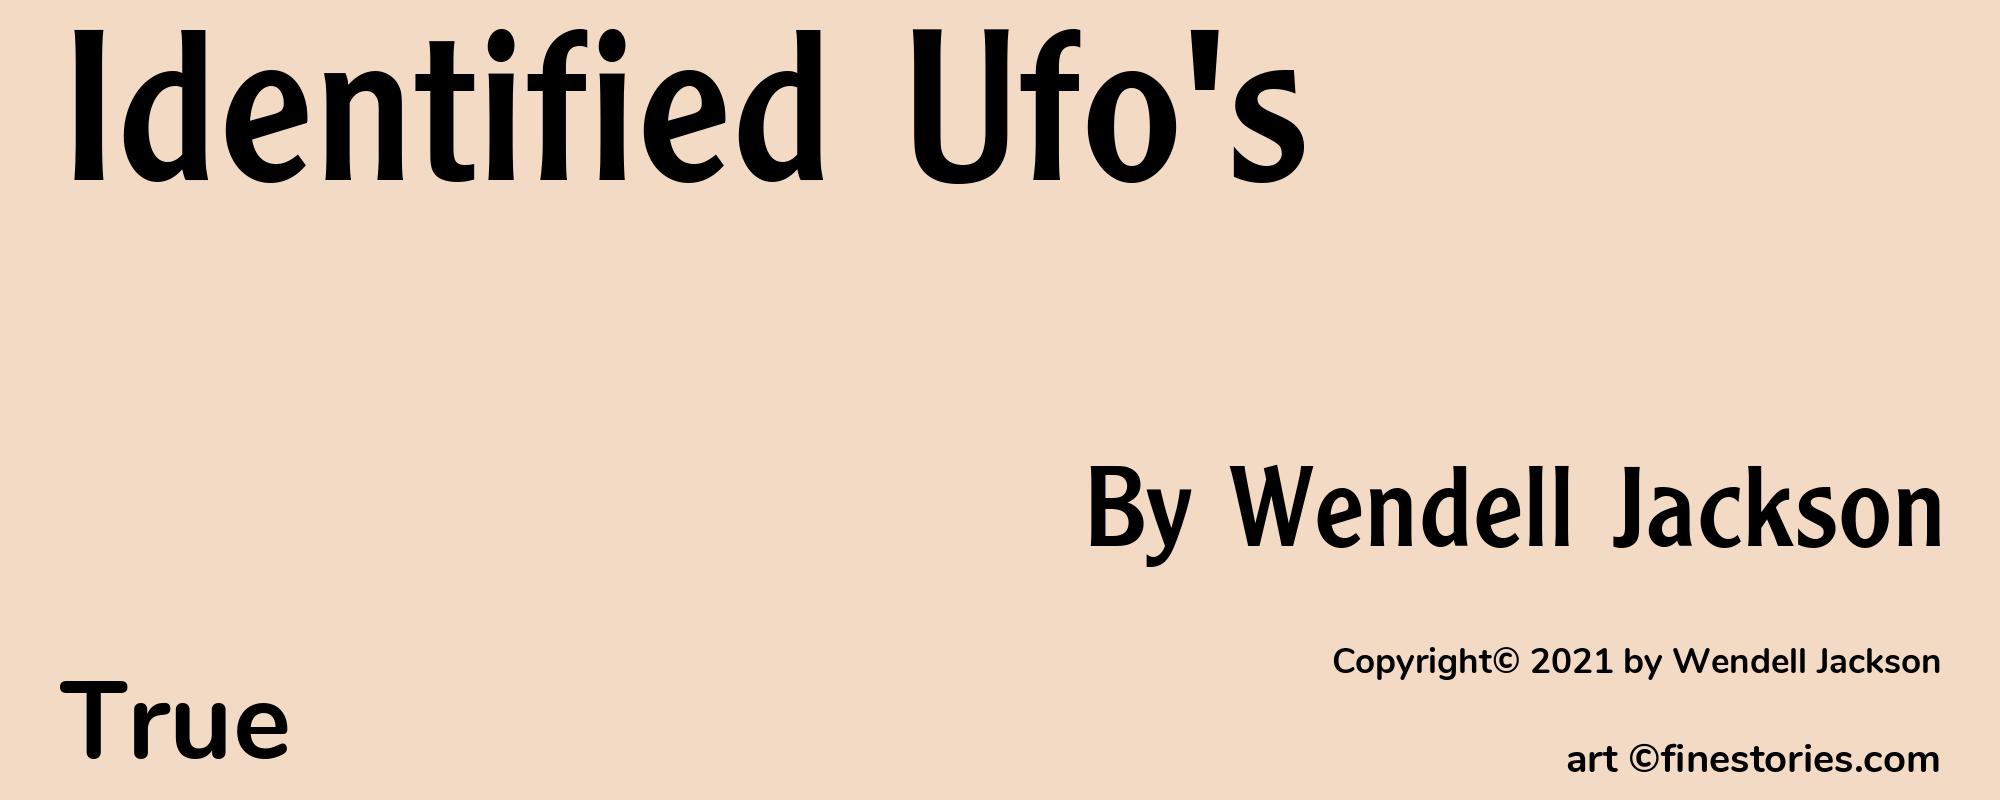 Identified Ufo's - Cover